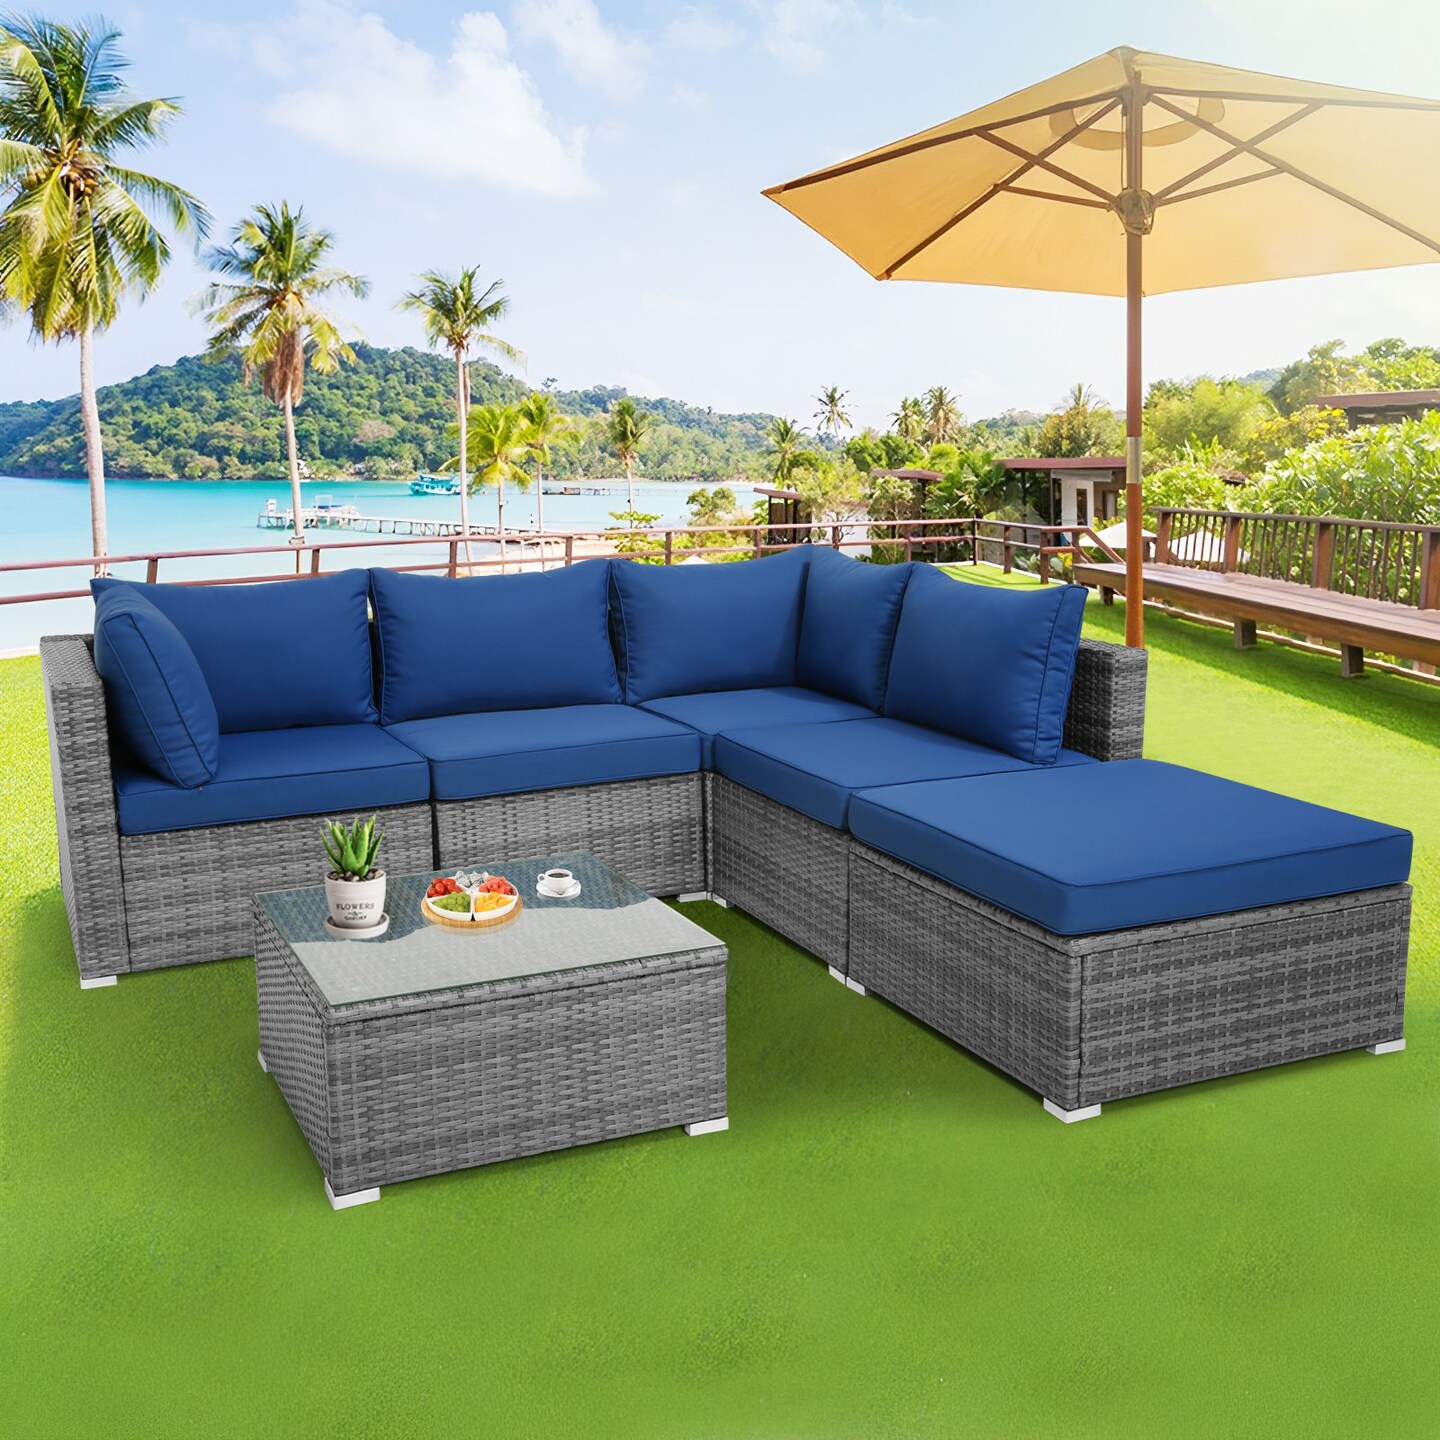 6 Pieces Outdoor Rattan Sofa Set with Seat and Back Cushions-Navy